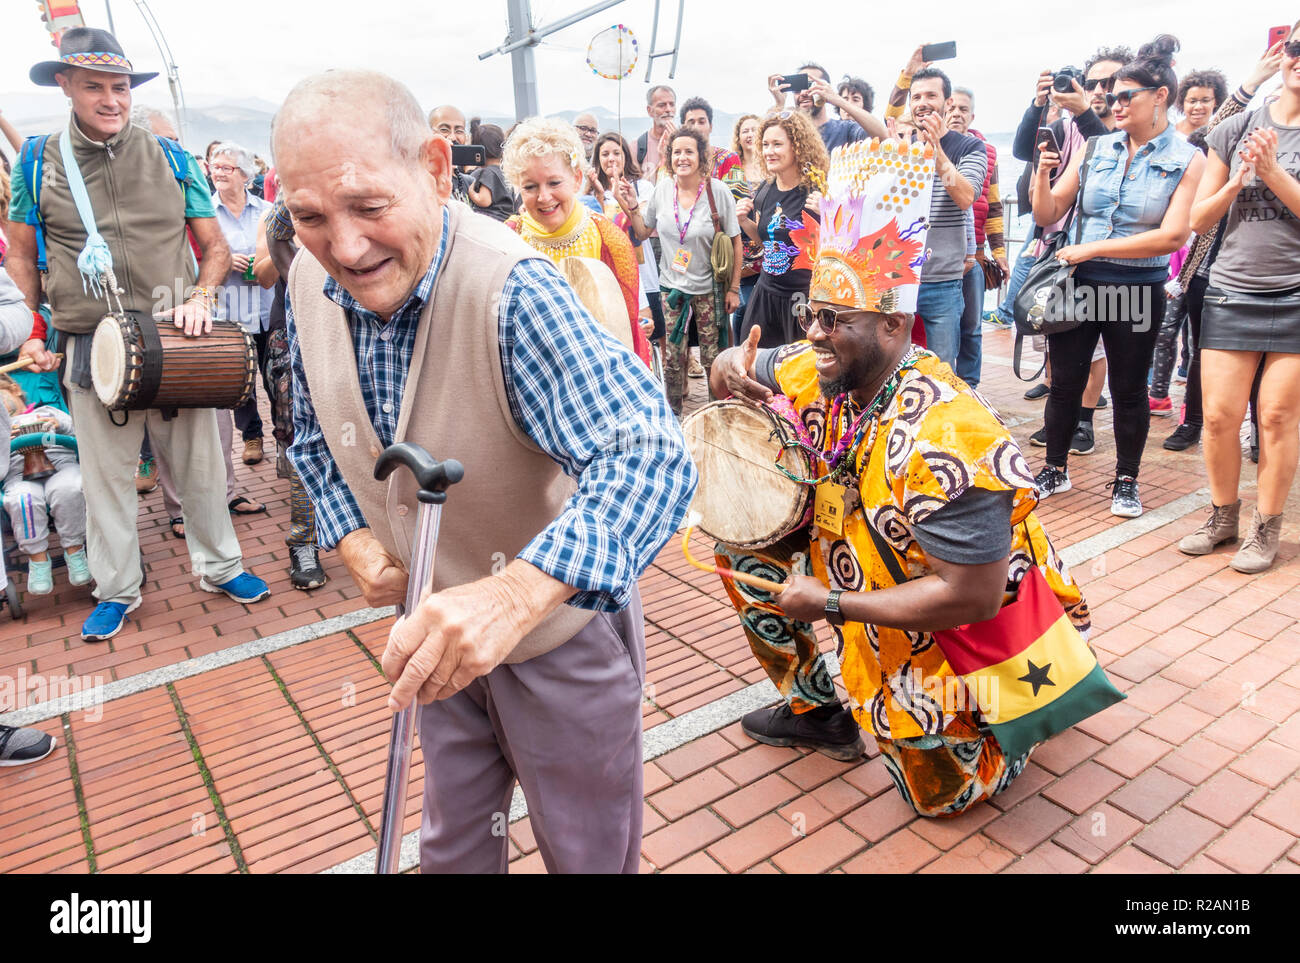 Las Palmas, Gran Canaria, Canary Islands, Spain. 18th November 2018. An  elderly local man gets out of his mobilty scooter and throws down some  moves at the WOMAD music festival closing procession